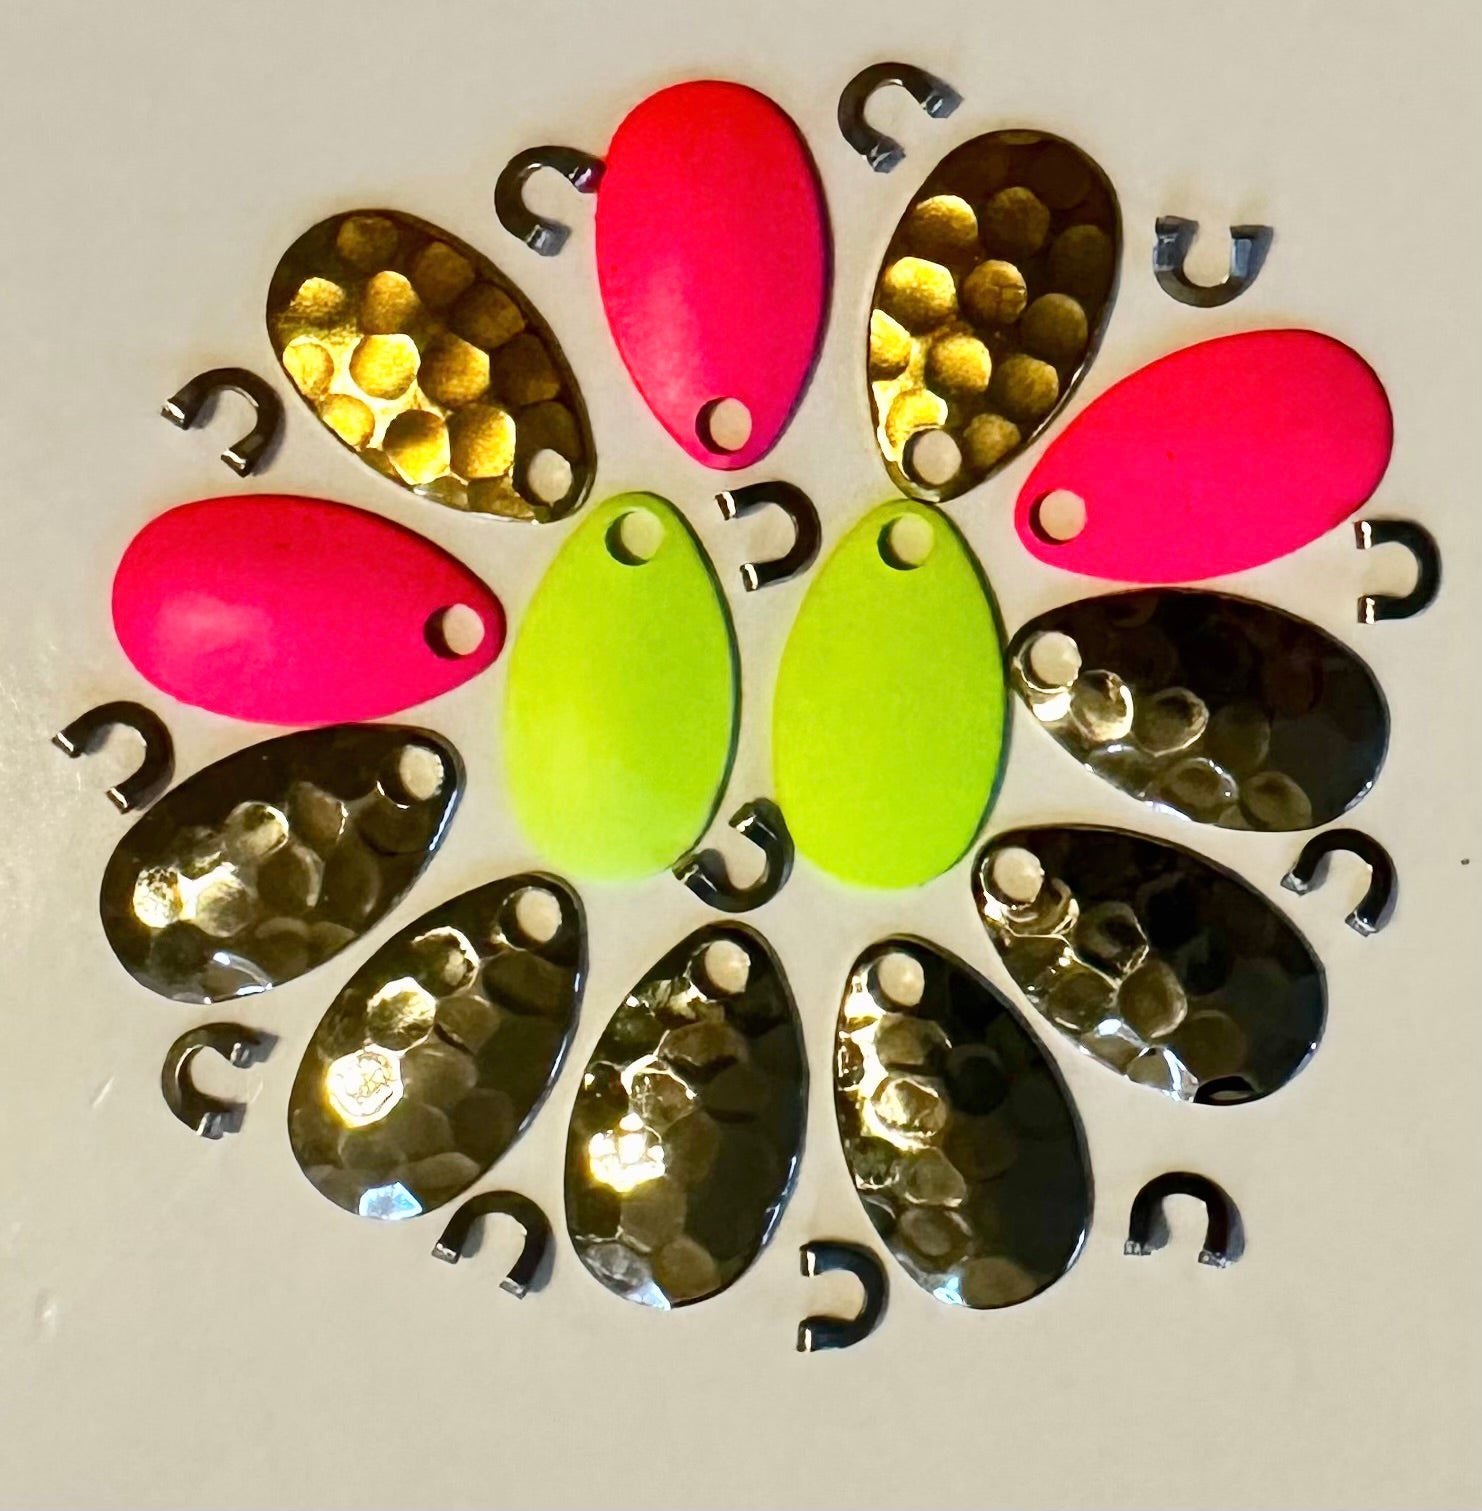 Spinner blade - 13 Assorted Color size #1 Indiana Spinner Blades